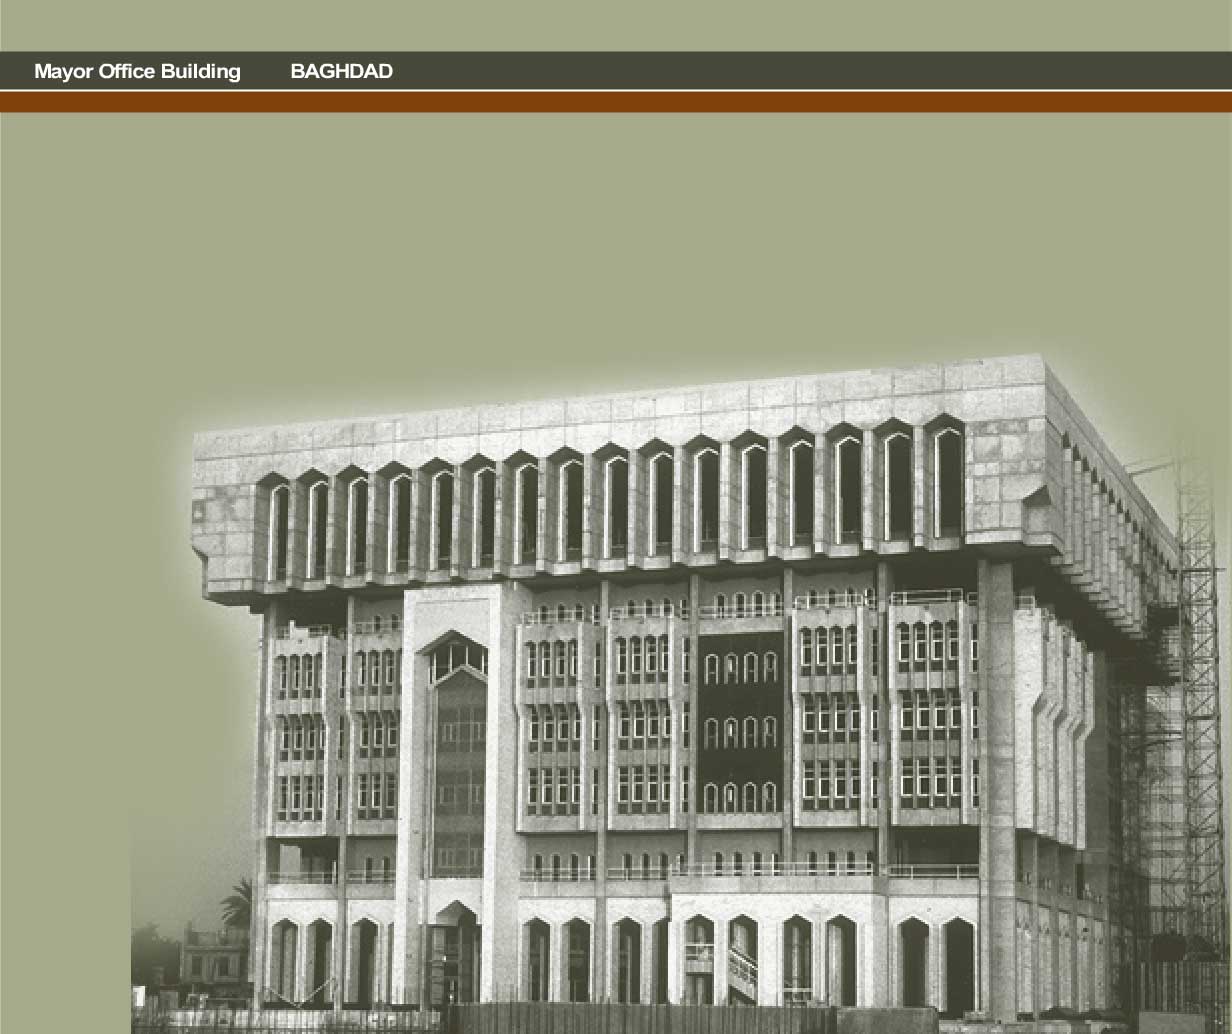 Digital image from the project gallery on the website of Hisham Munir, showing the exterior of the Mayor's Office Building, Baghdad.